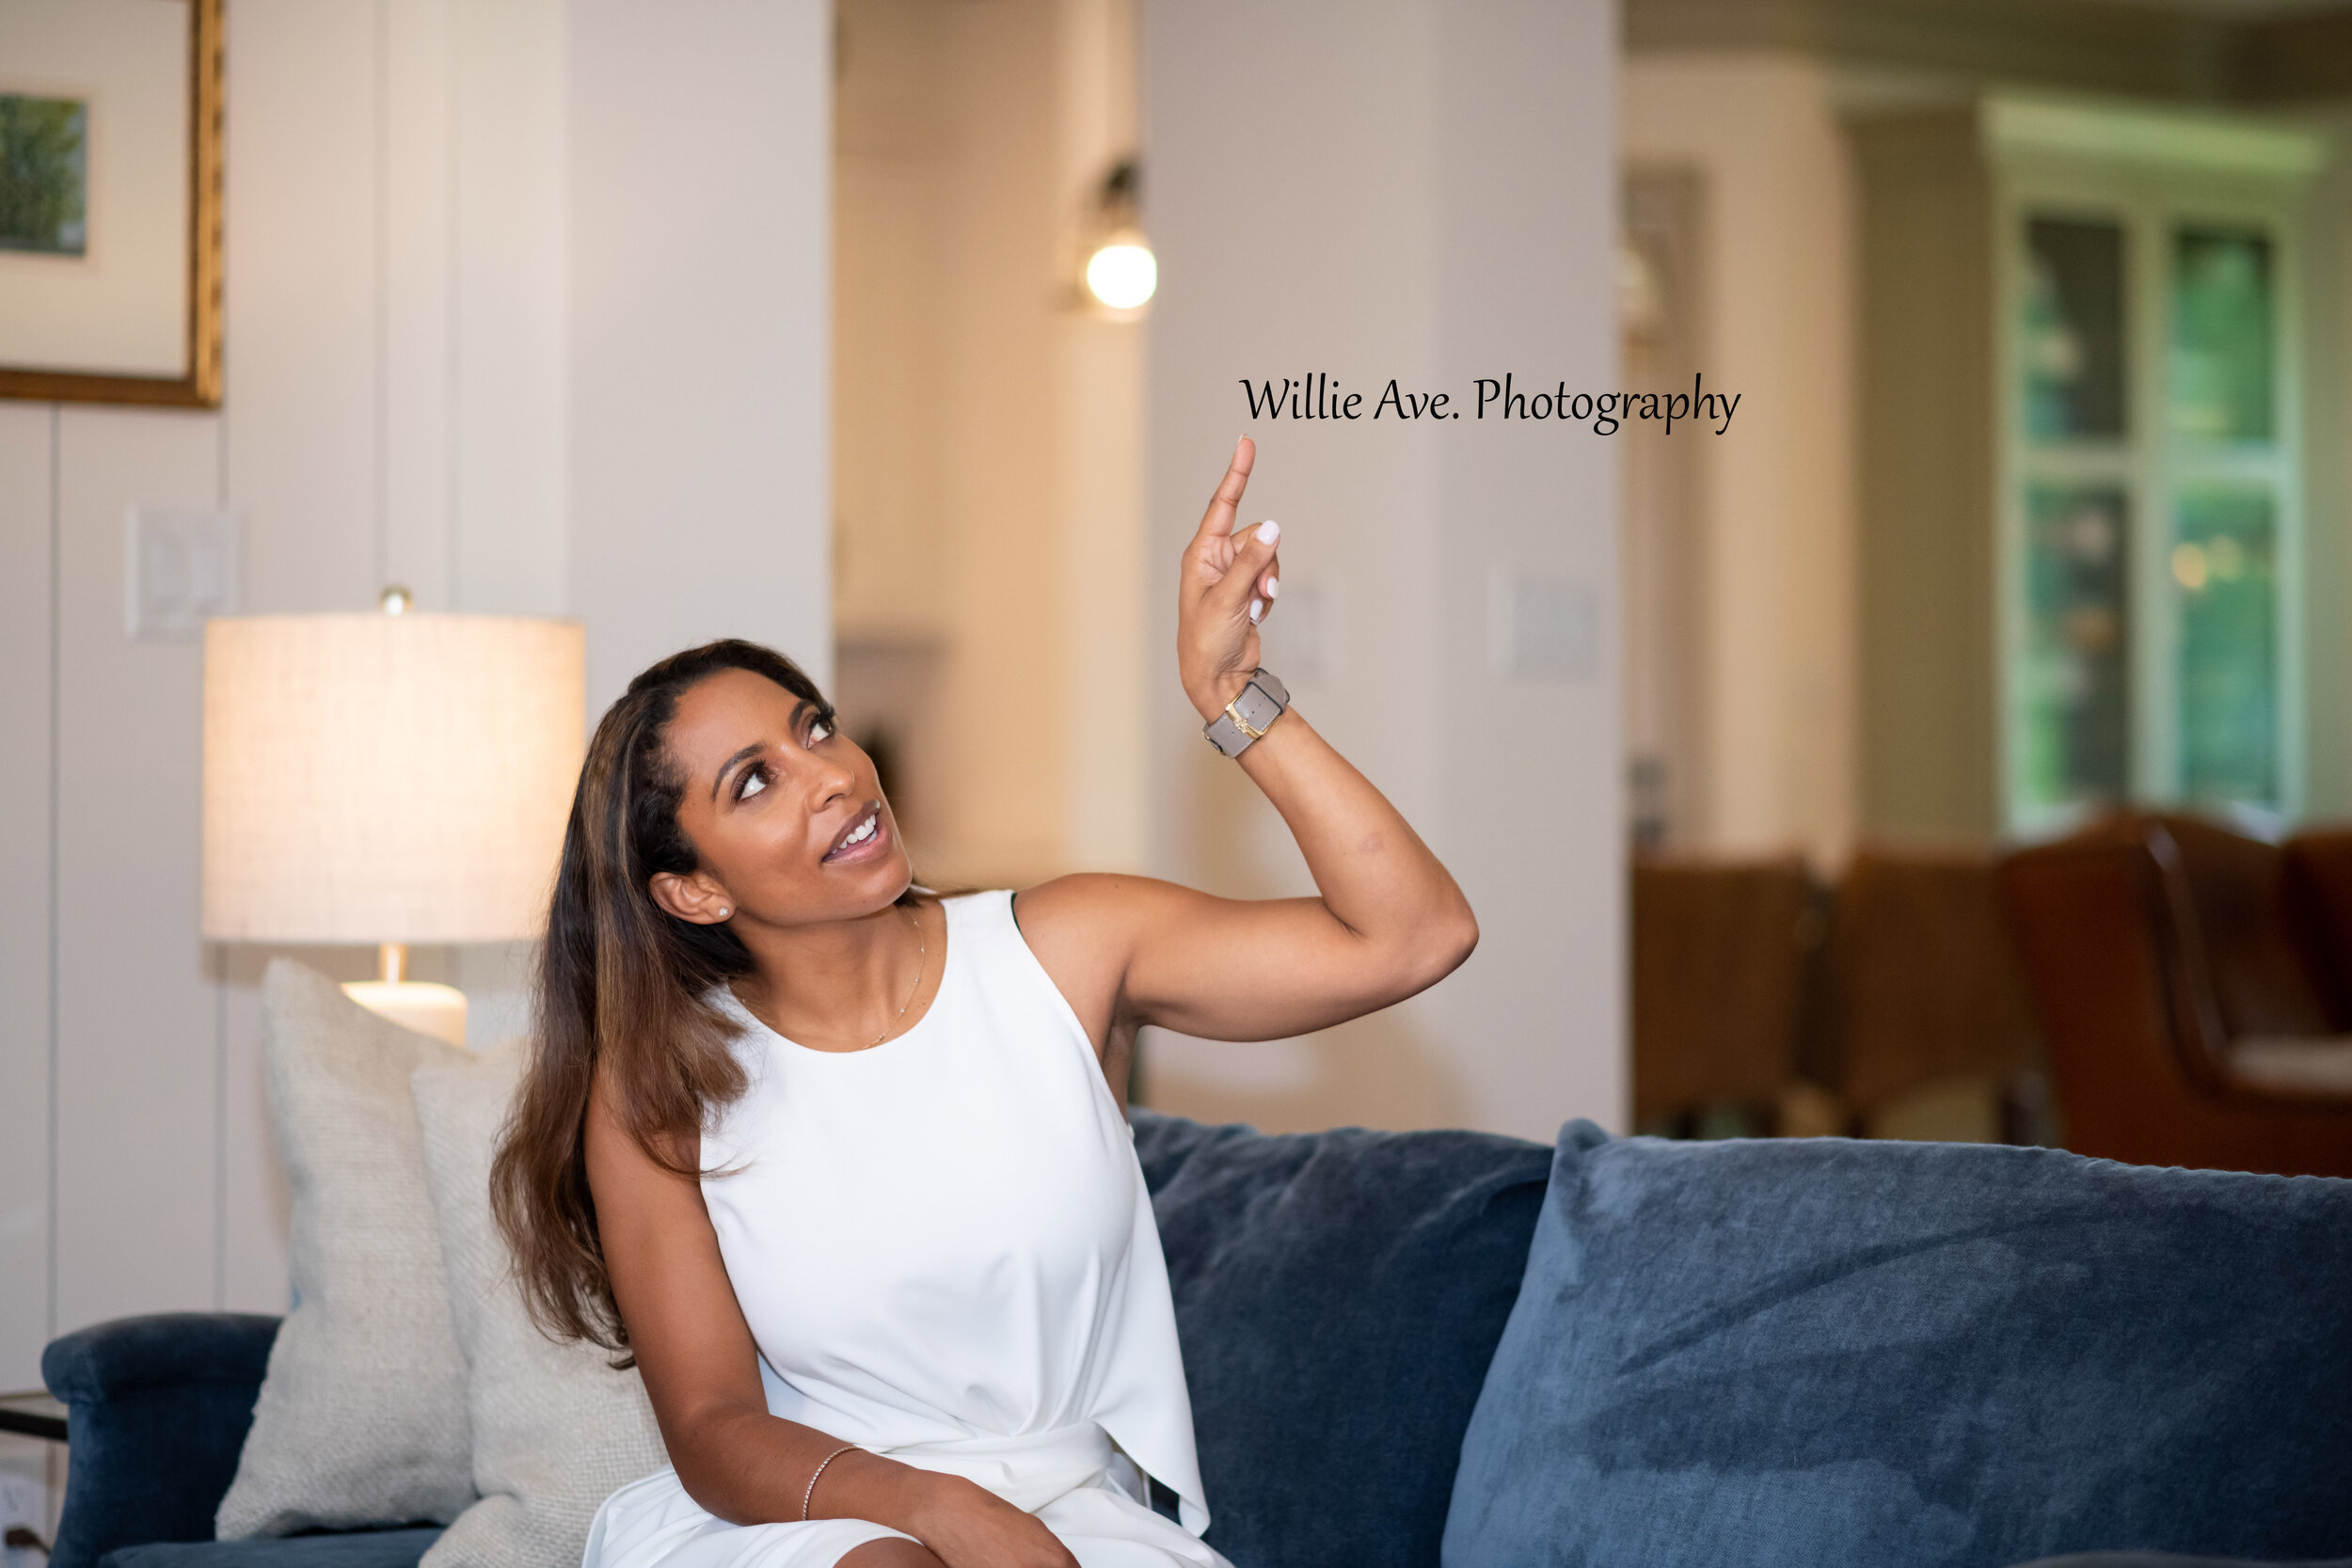  Professional portraits by Willie Ave. Photography. Use your professional images for marketing, social media and more! 